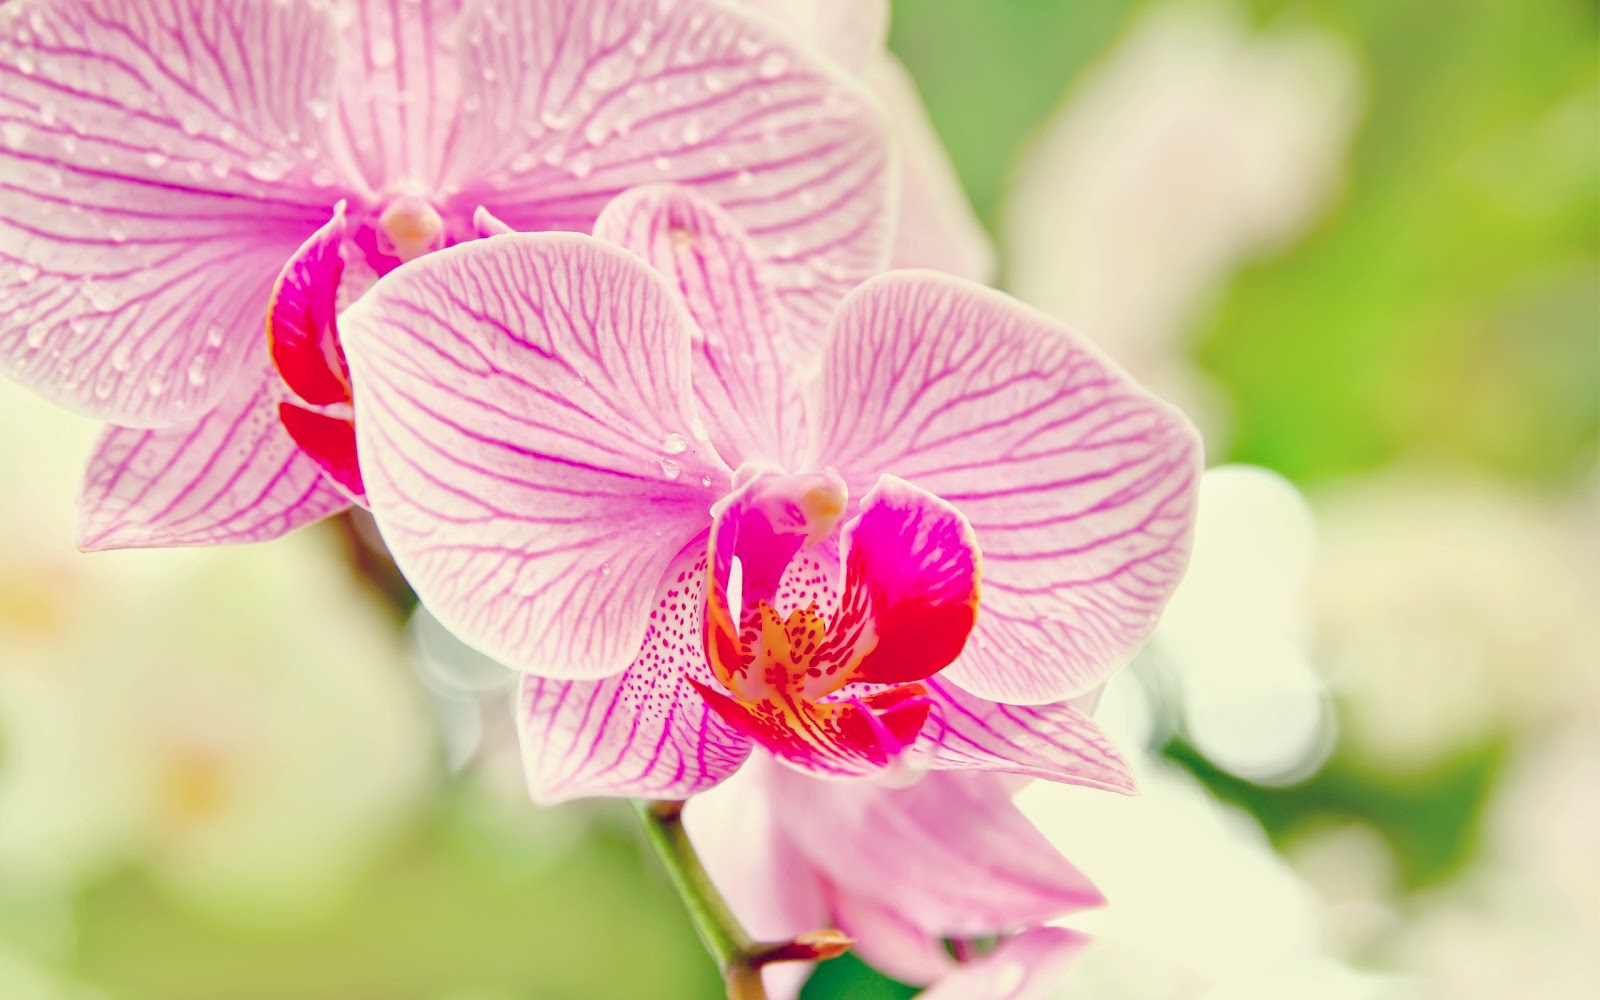 Orchid Flower Image HD Wallpaper Stock Photos